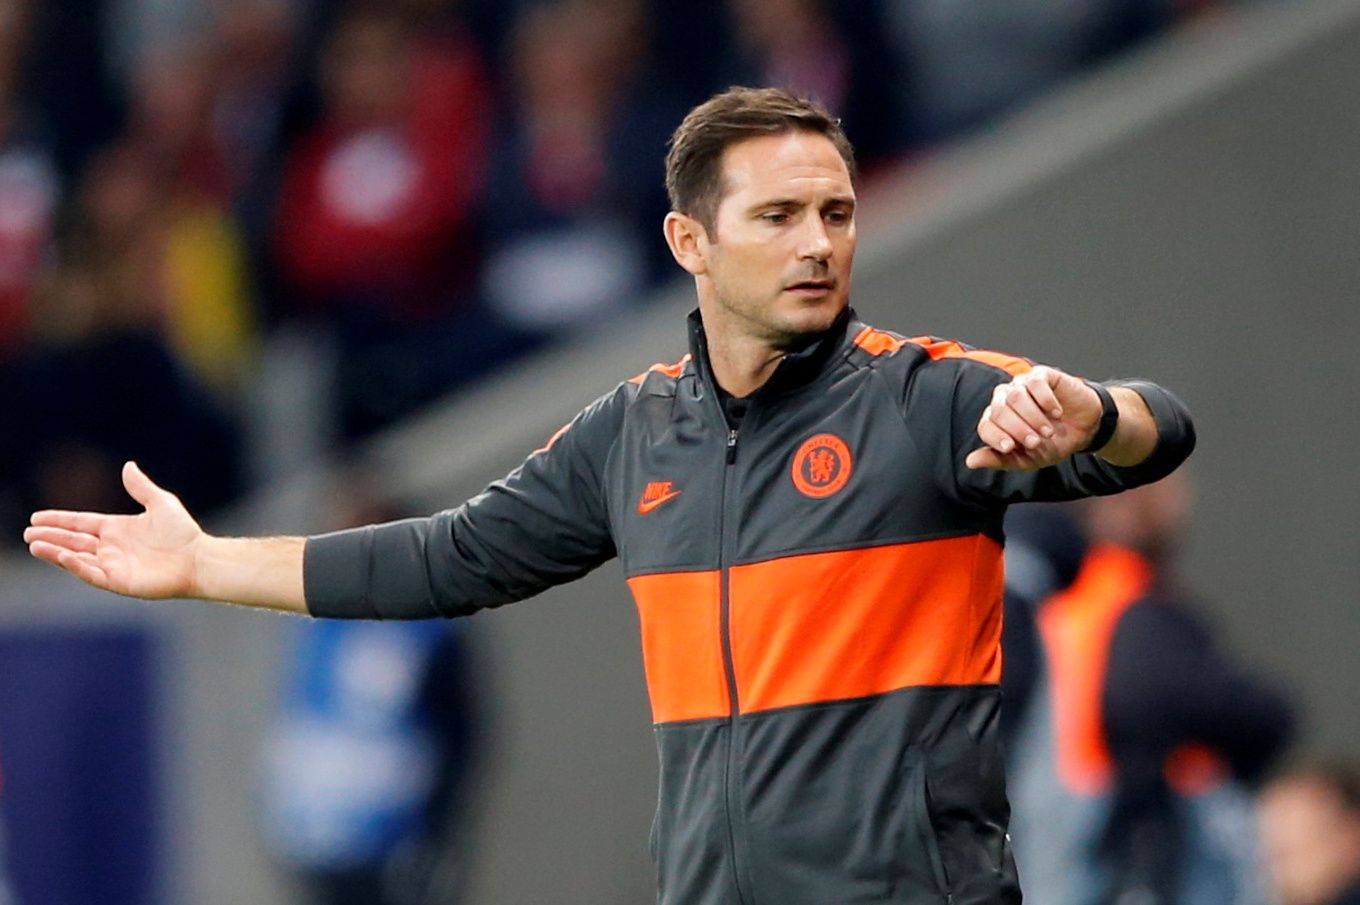 Soccer Football - Champions League - Group H - Lille v Chelsea - Stade Pierre-Mauroy, Lille, France - October 2, 2019  Chelsea manager Frank Lampard checks his watch towards the end of the match  REUTERS/Pascal Rossignol